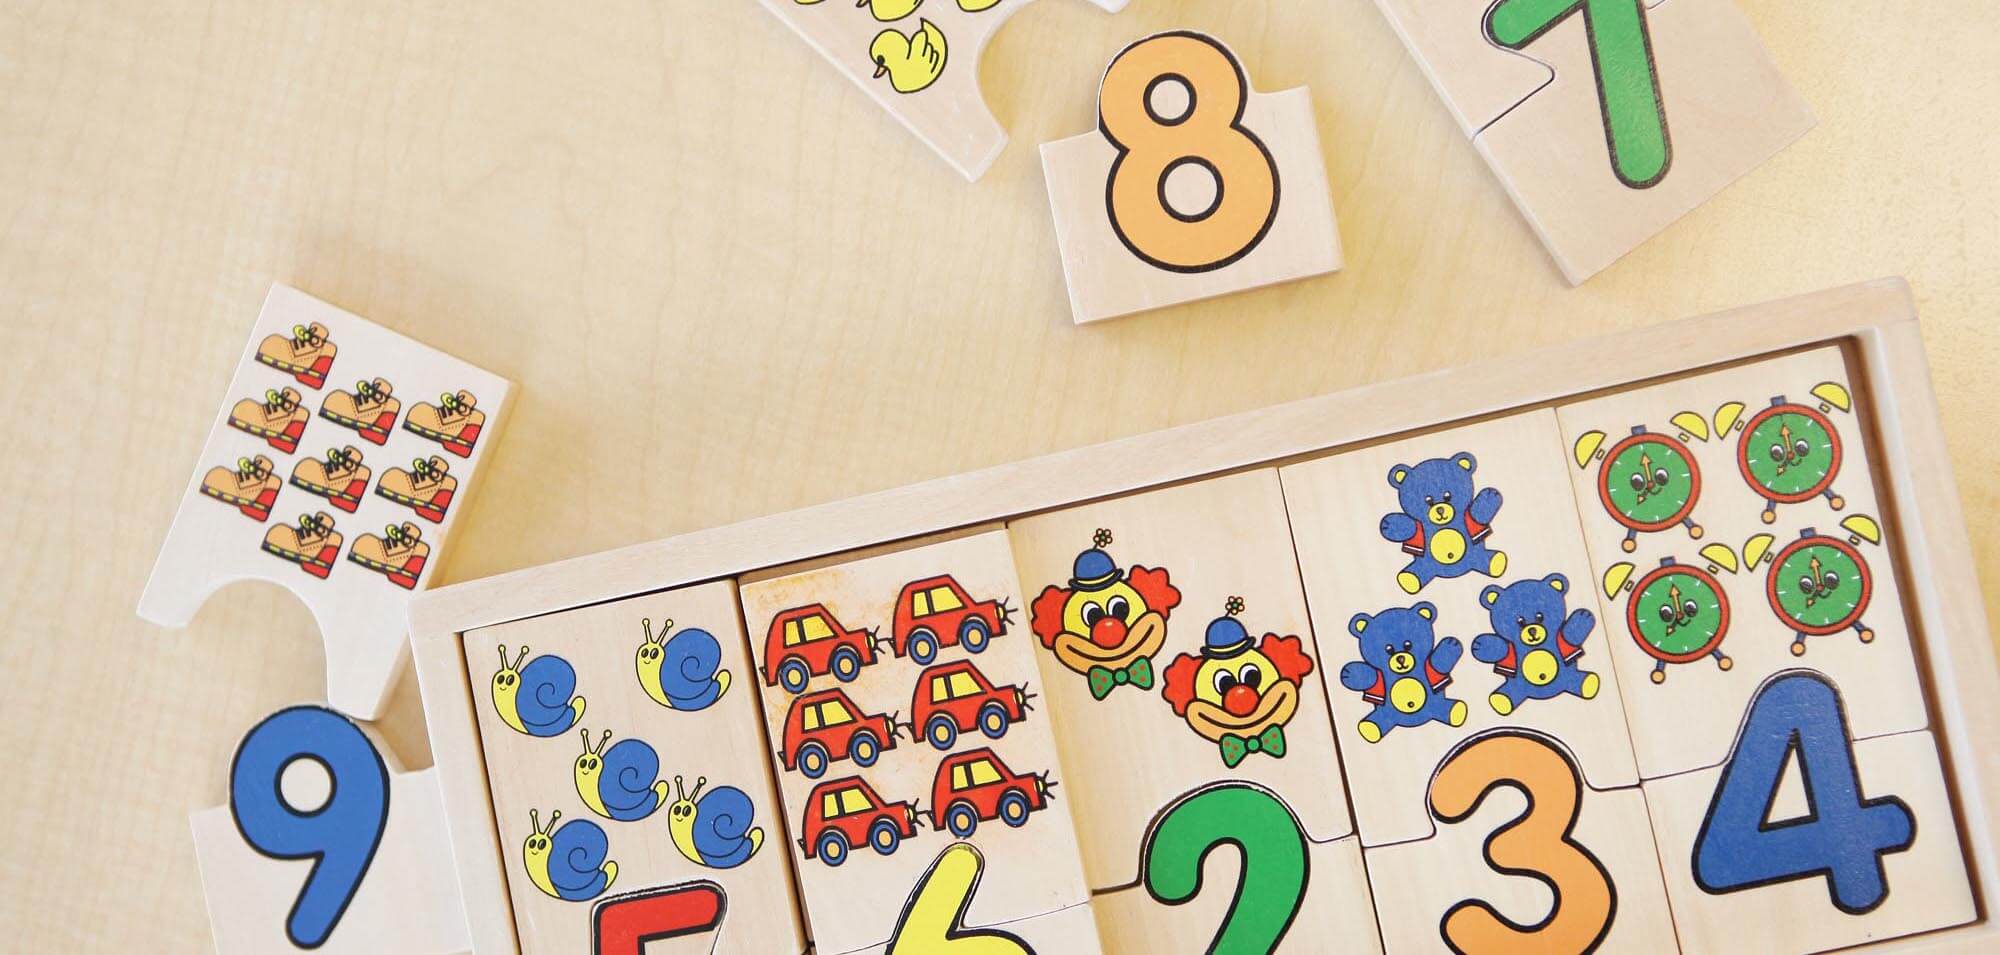 Numbers and math cards shown on a table in the shape of puzzle pieces